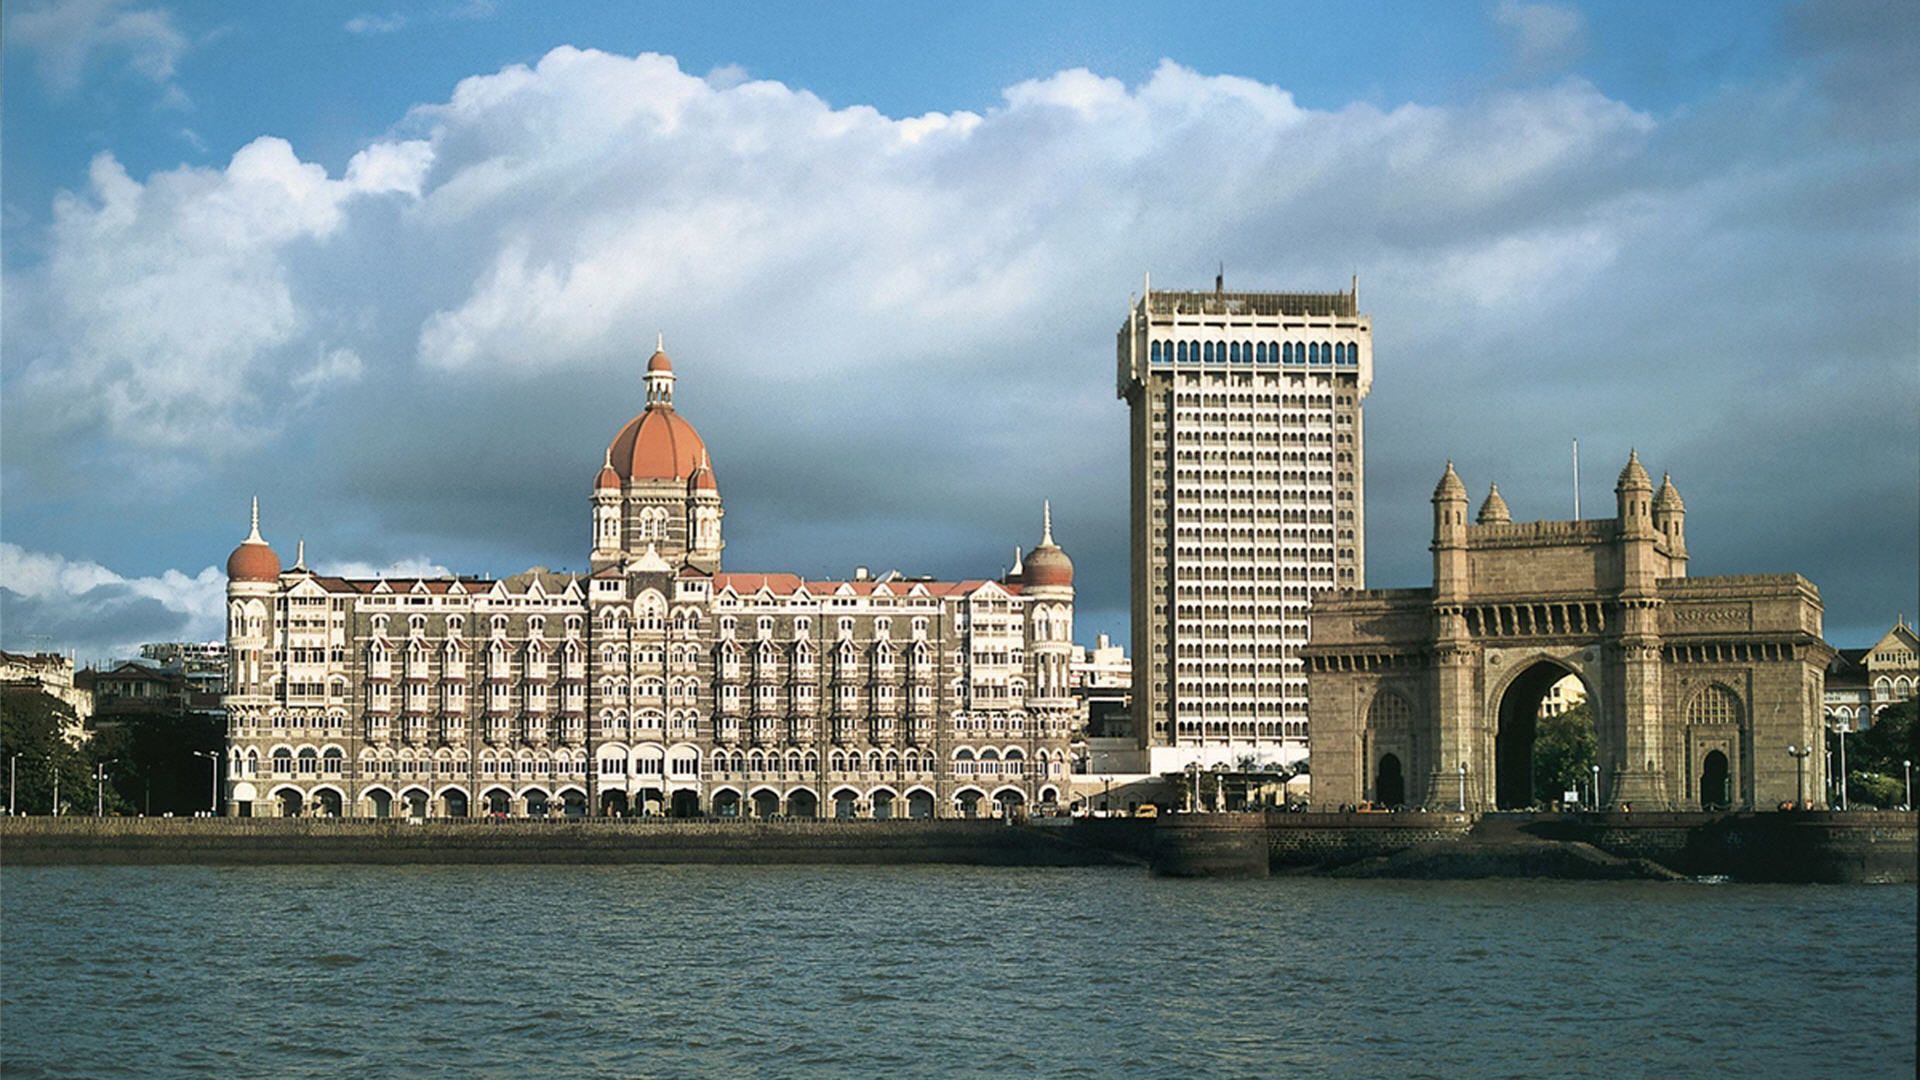 Gate of India in Mumbai wallpapers and images - wallpapers ...